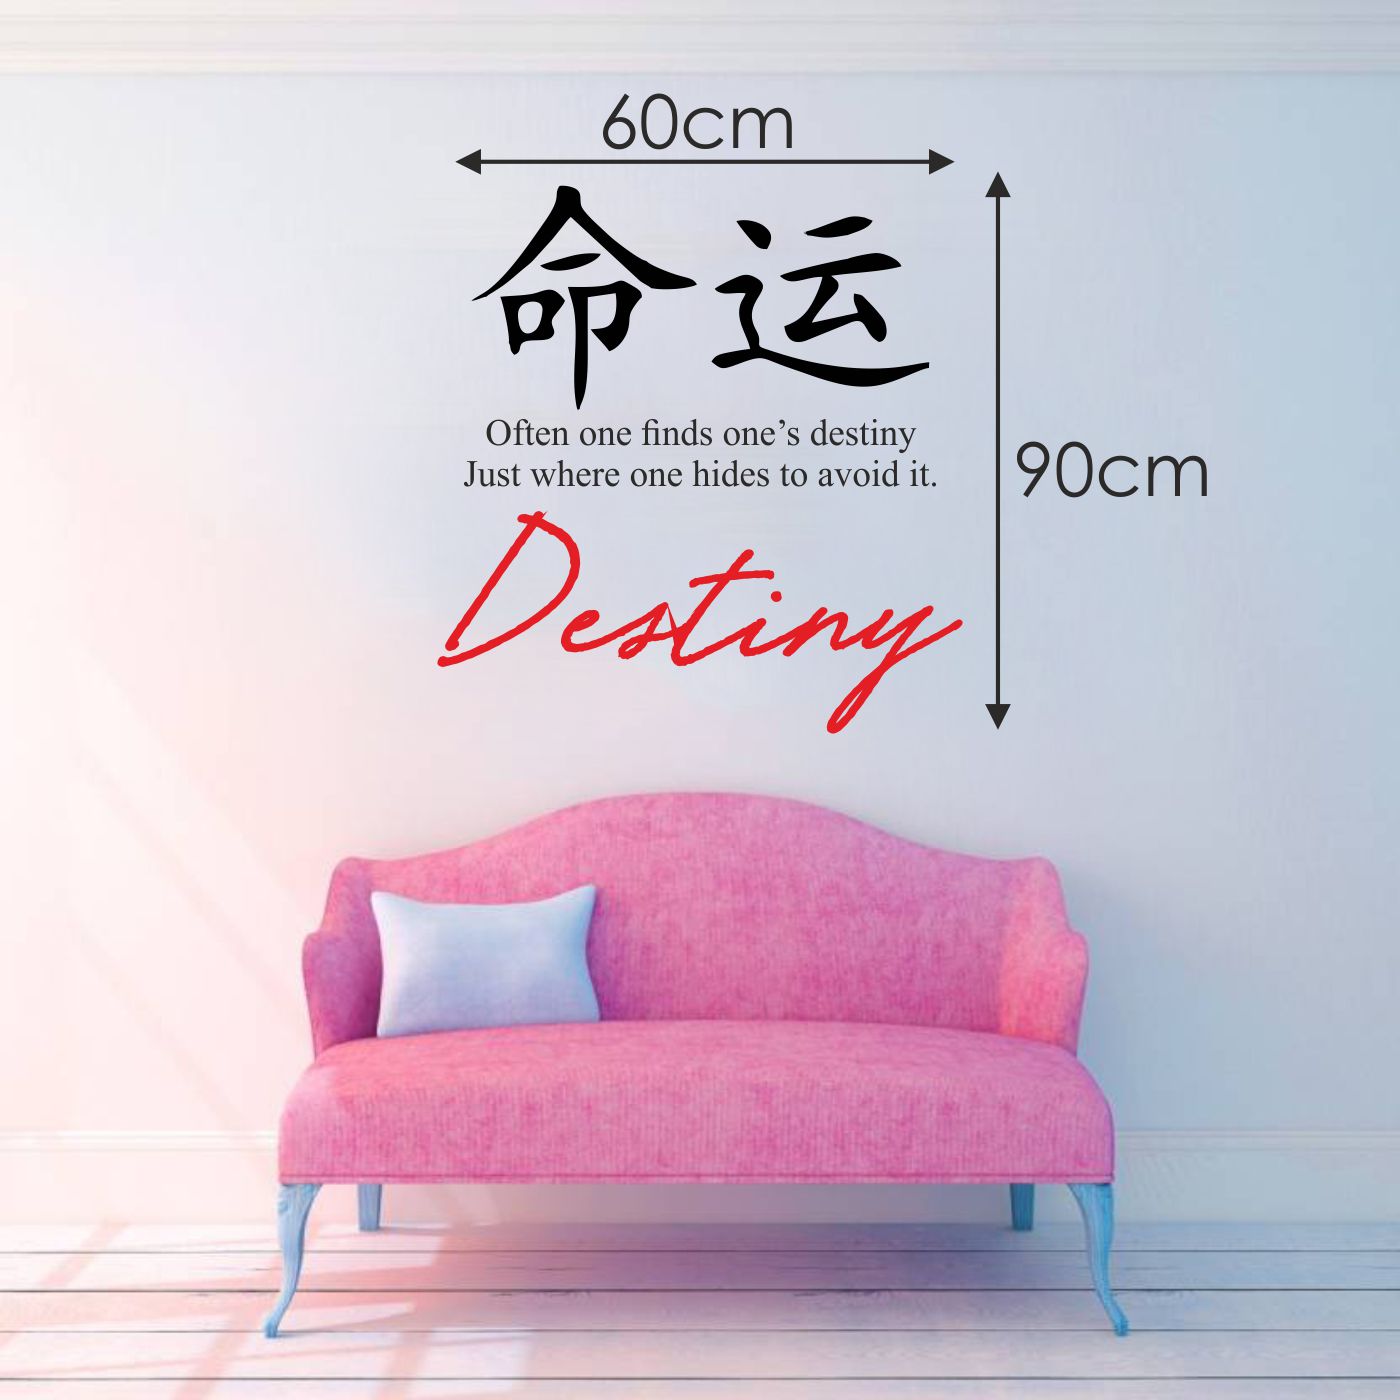 ORKA Chinese Wall Decal Sticker 5  